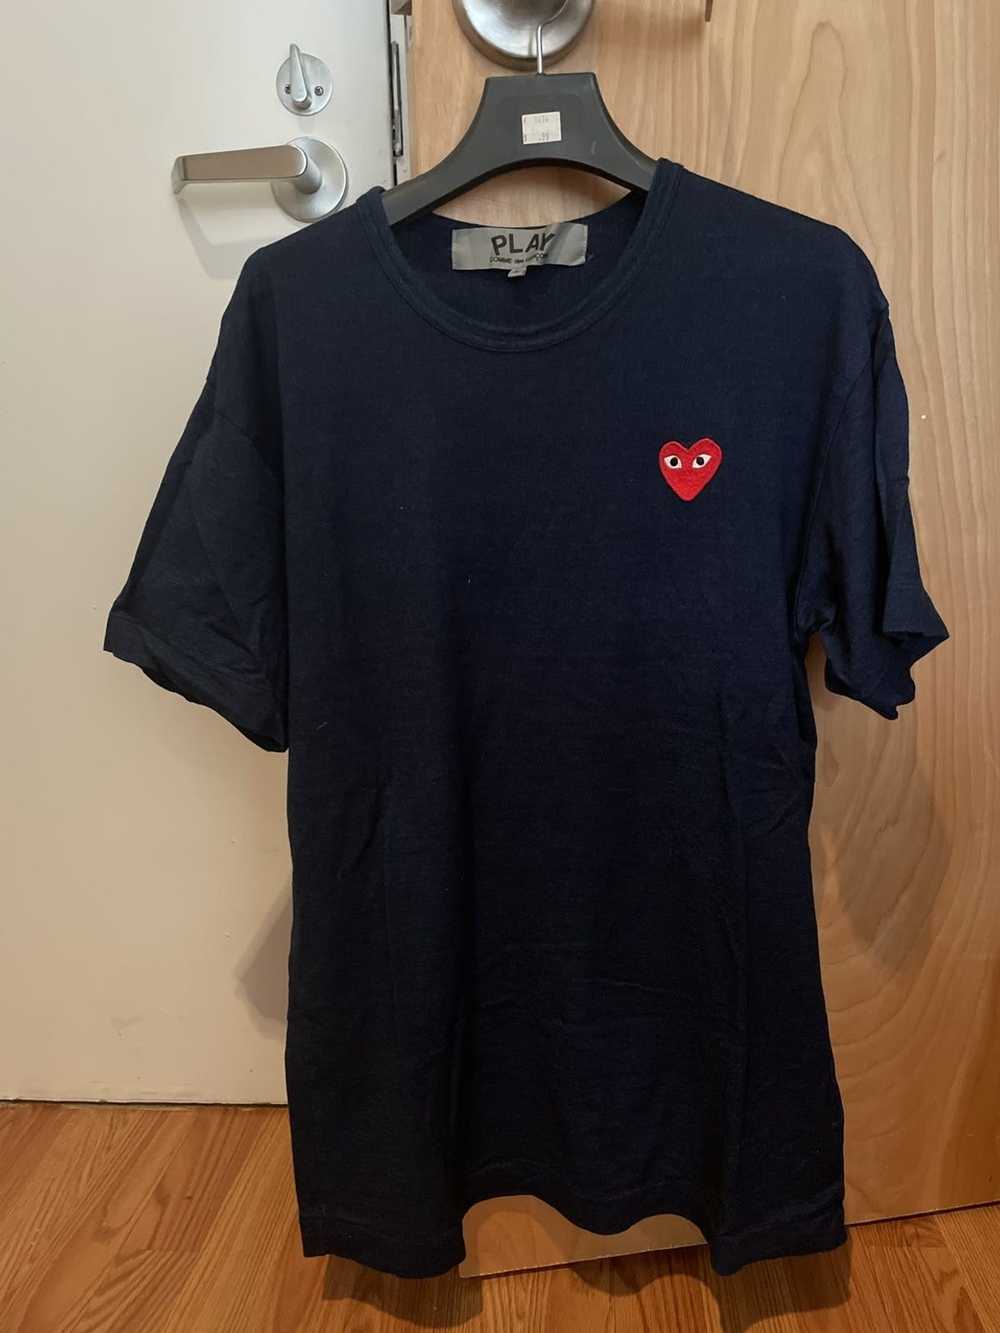 Comme Des Garcons Play Navy Play shirt - image 3